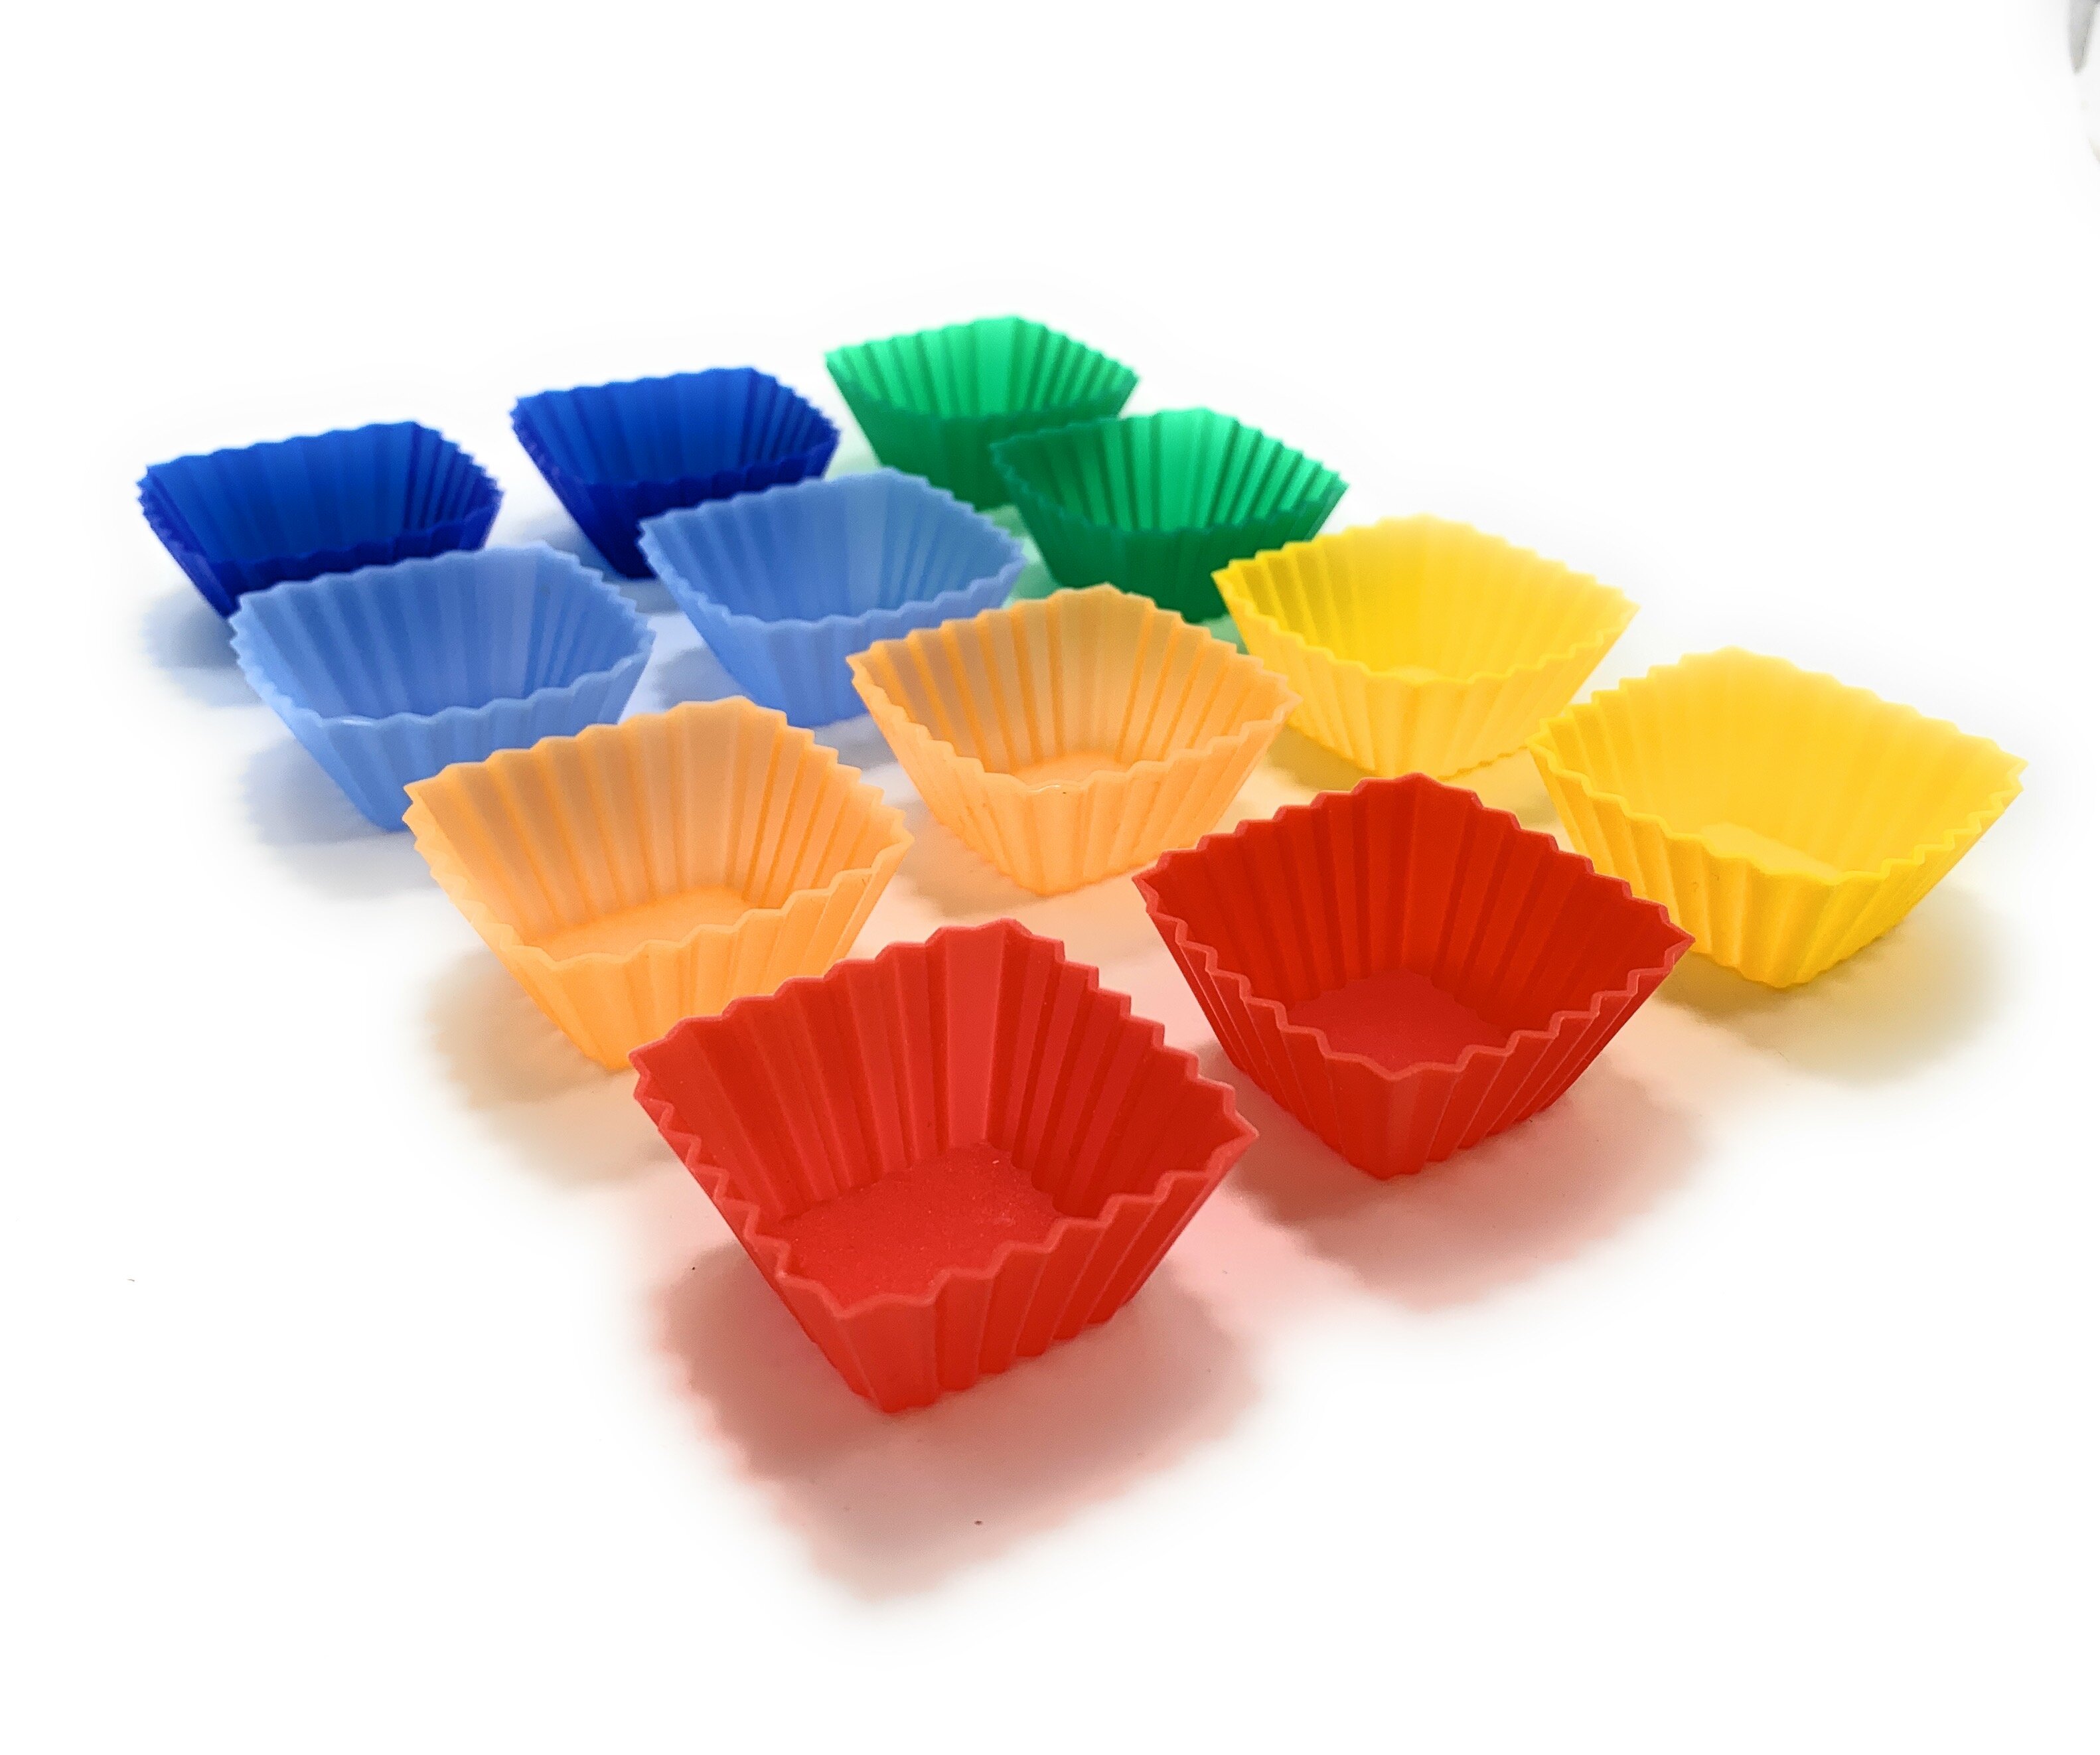 Basics Reusable Silicone Baking Cups, Muffin Liners - Pack of 1